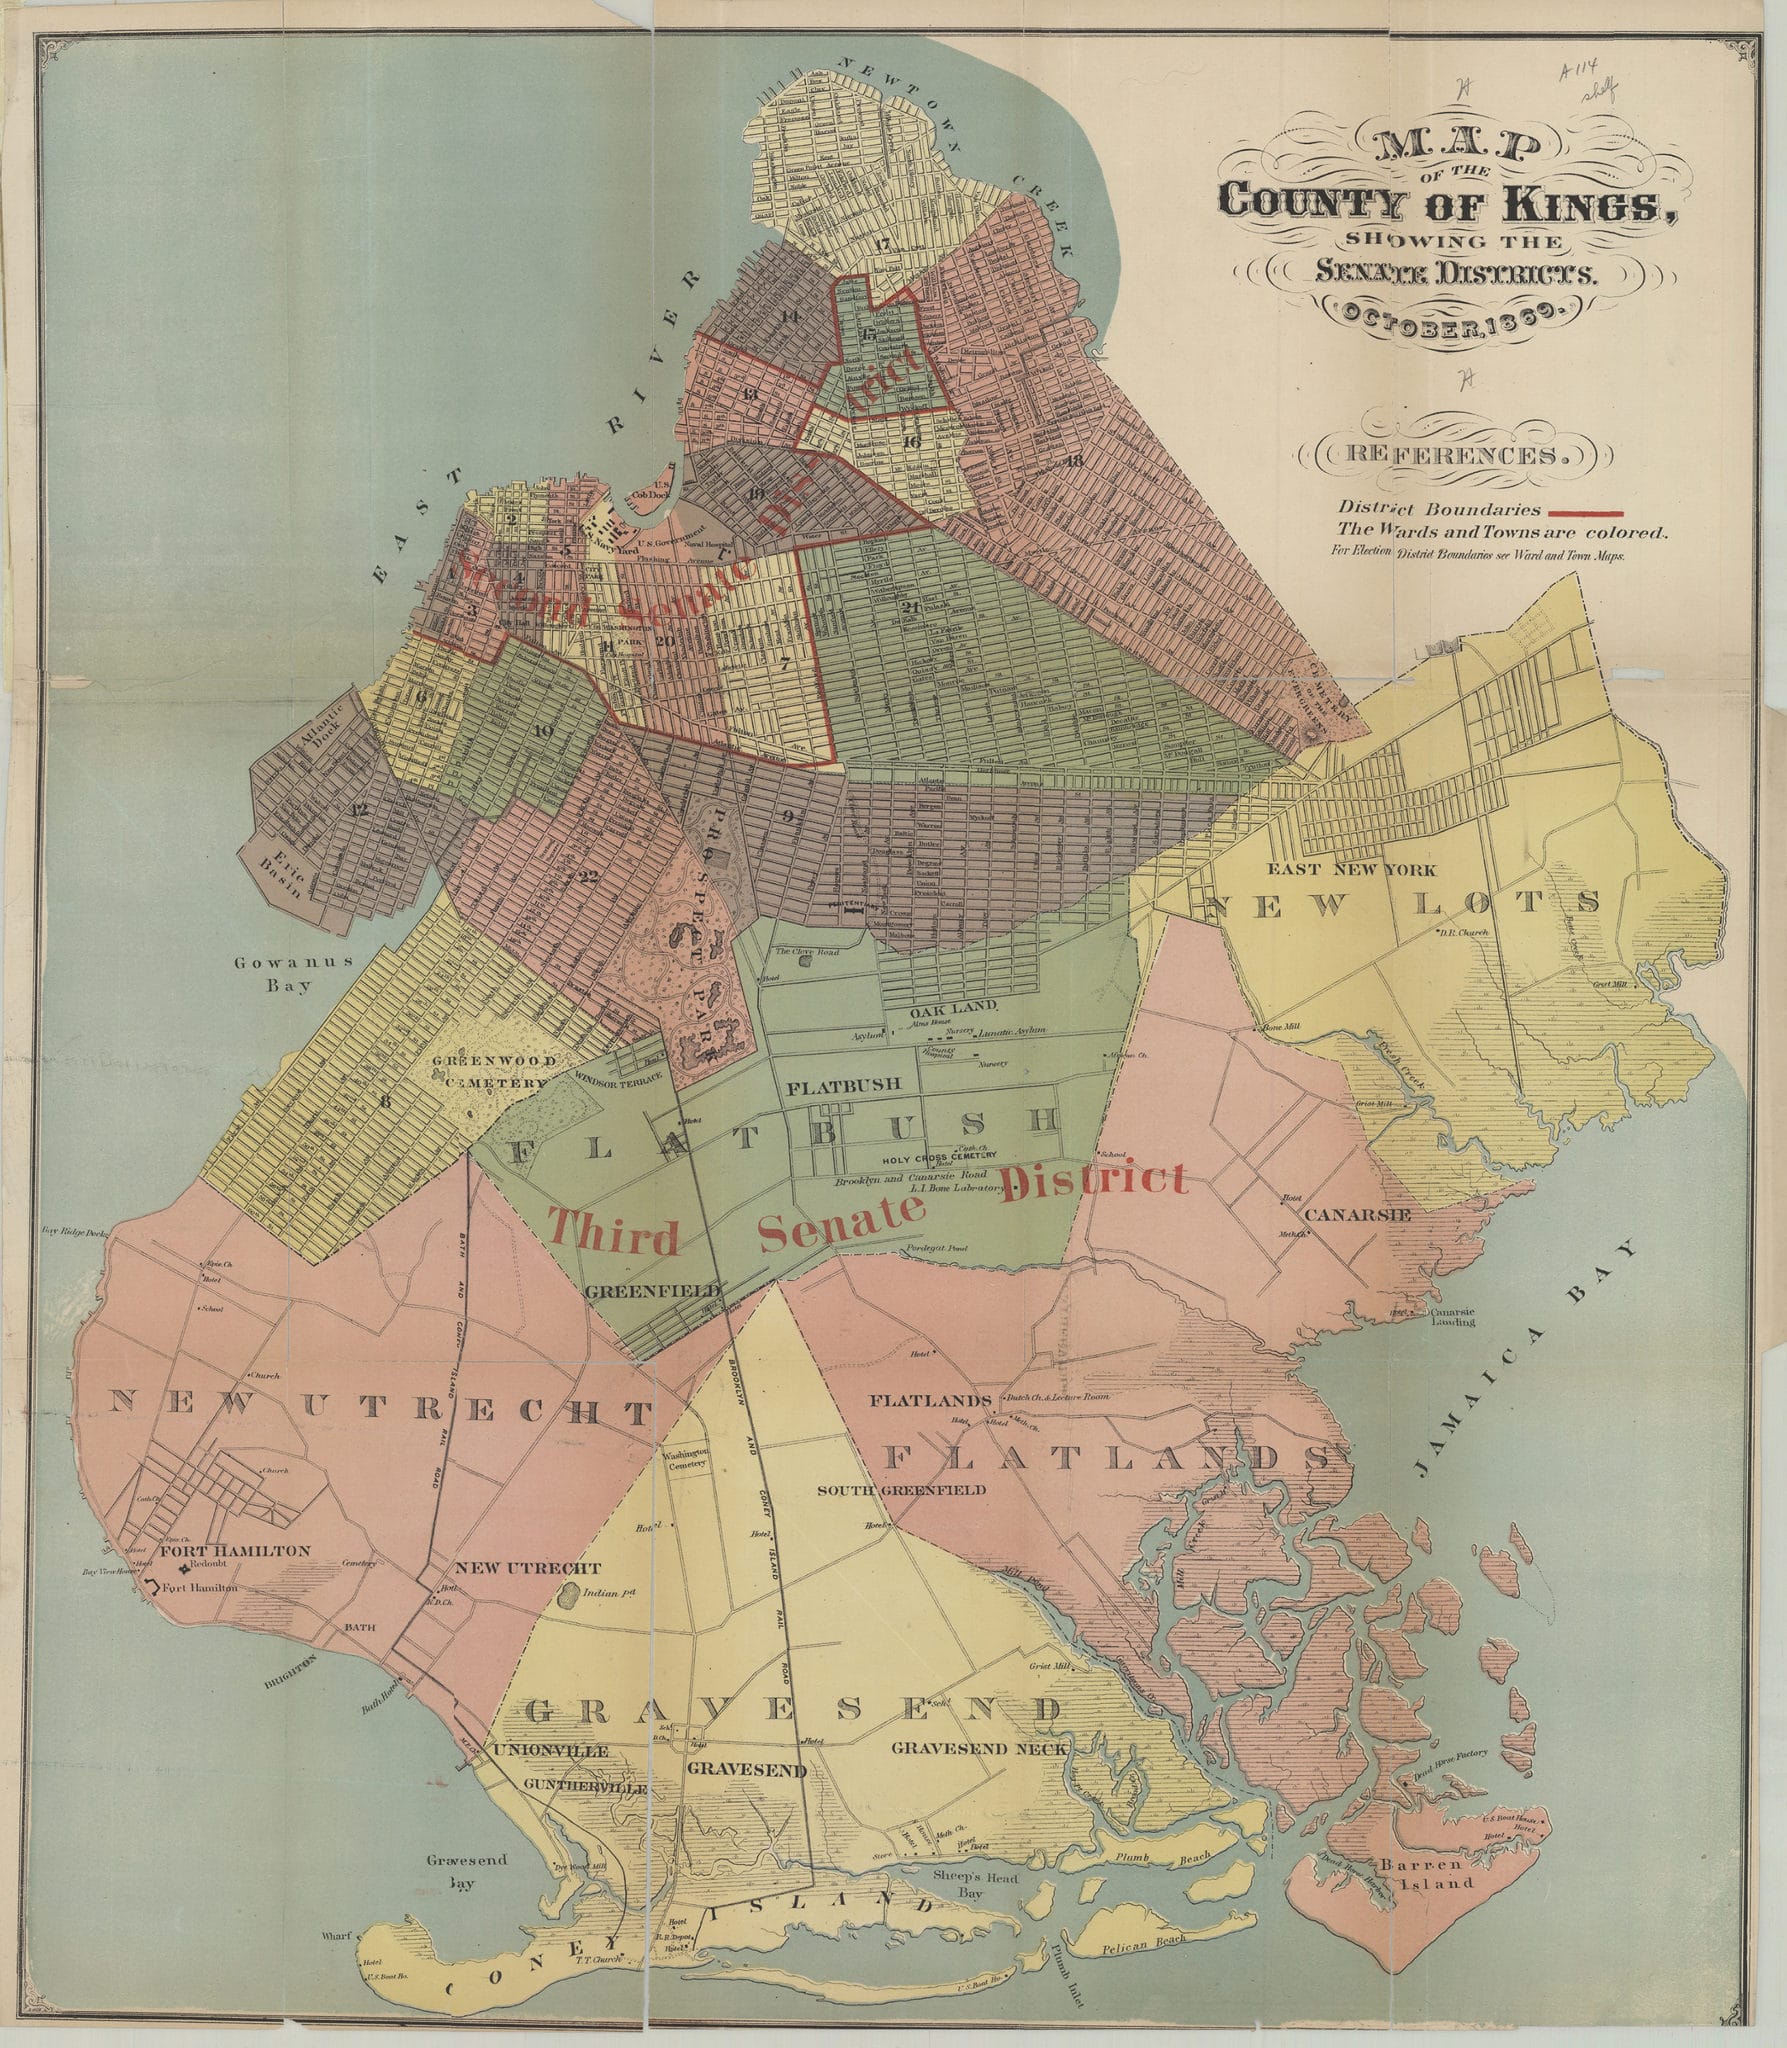 Brooklyn History One Map At A Time